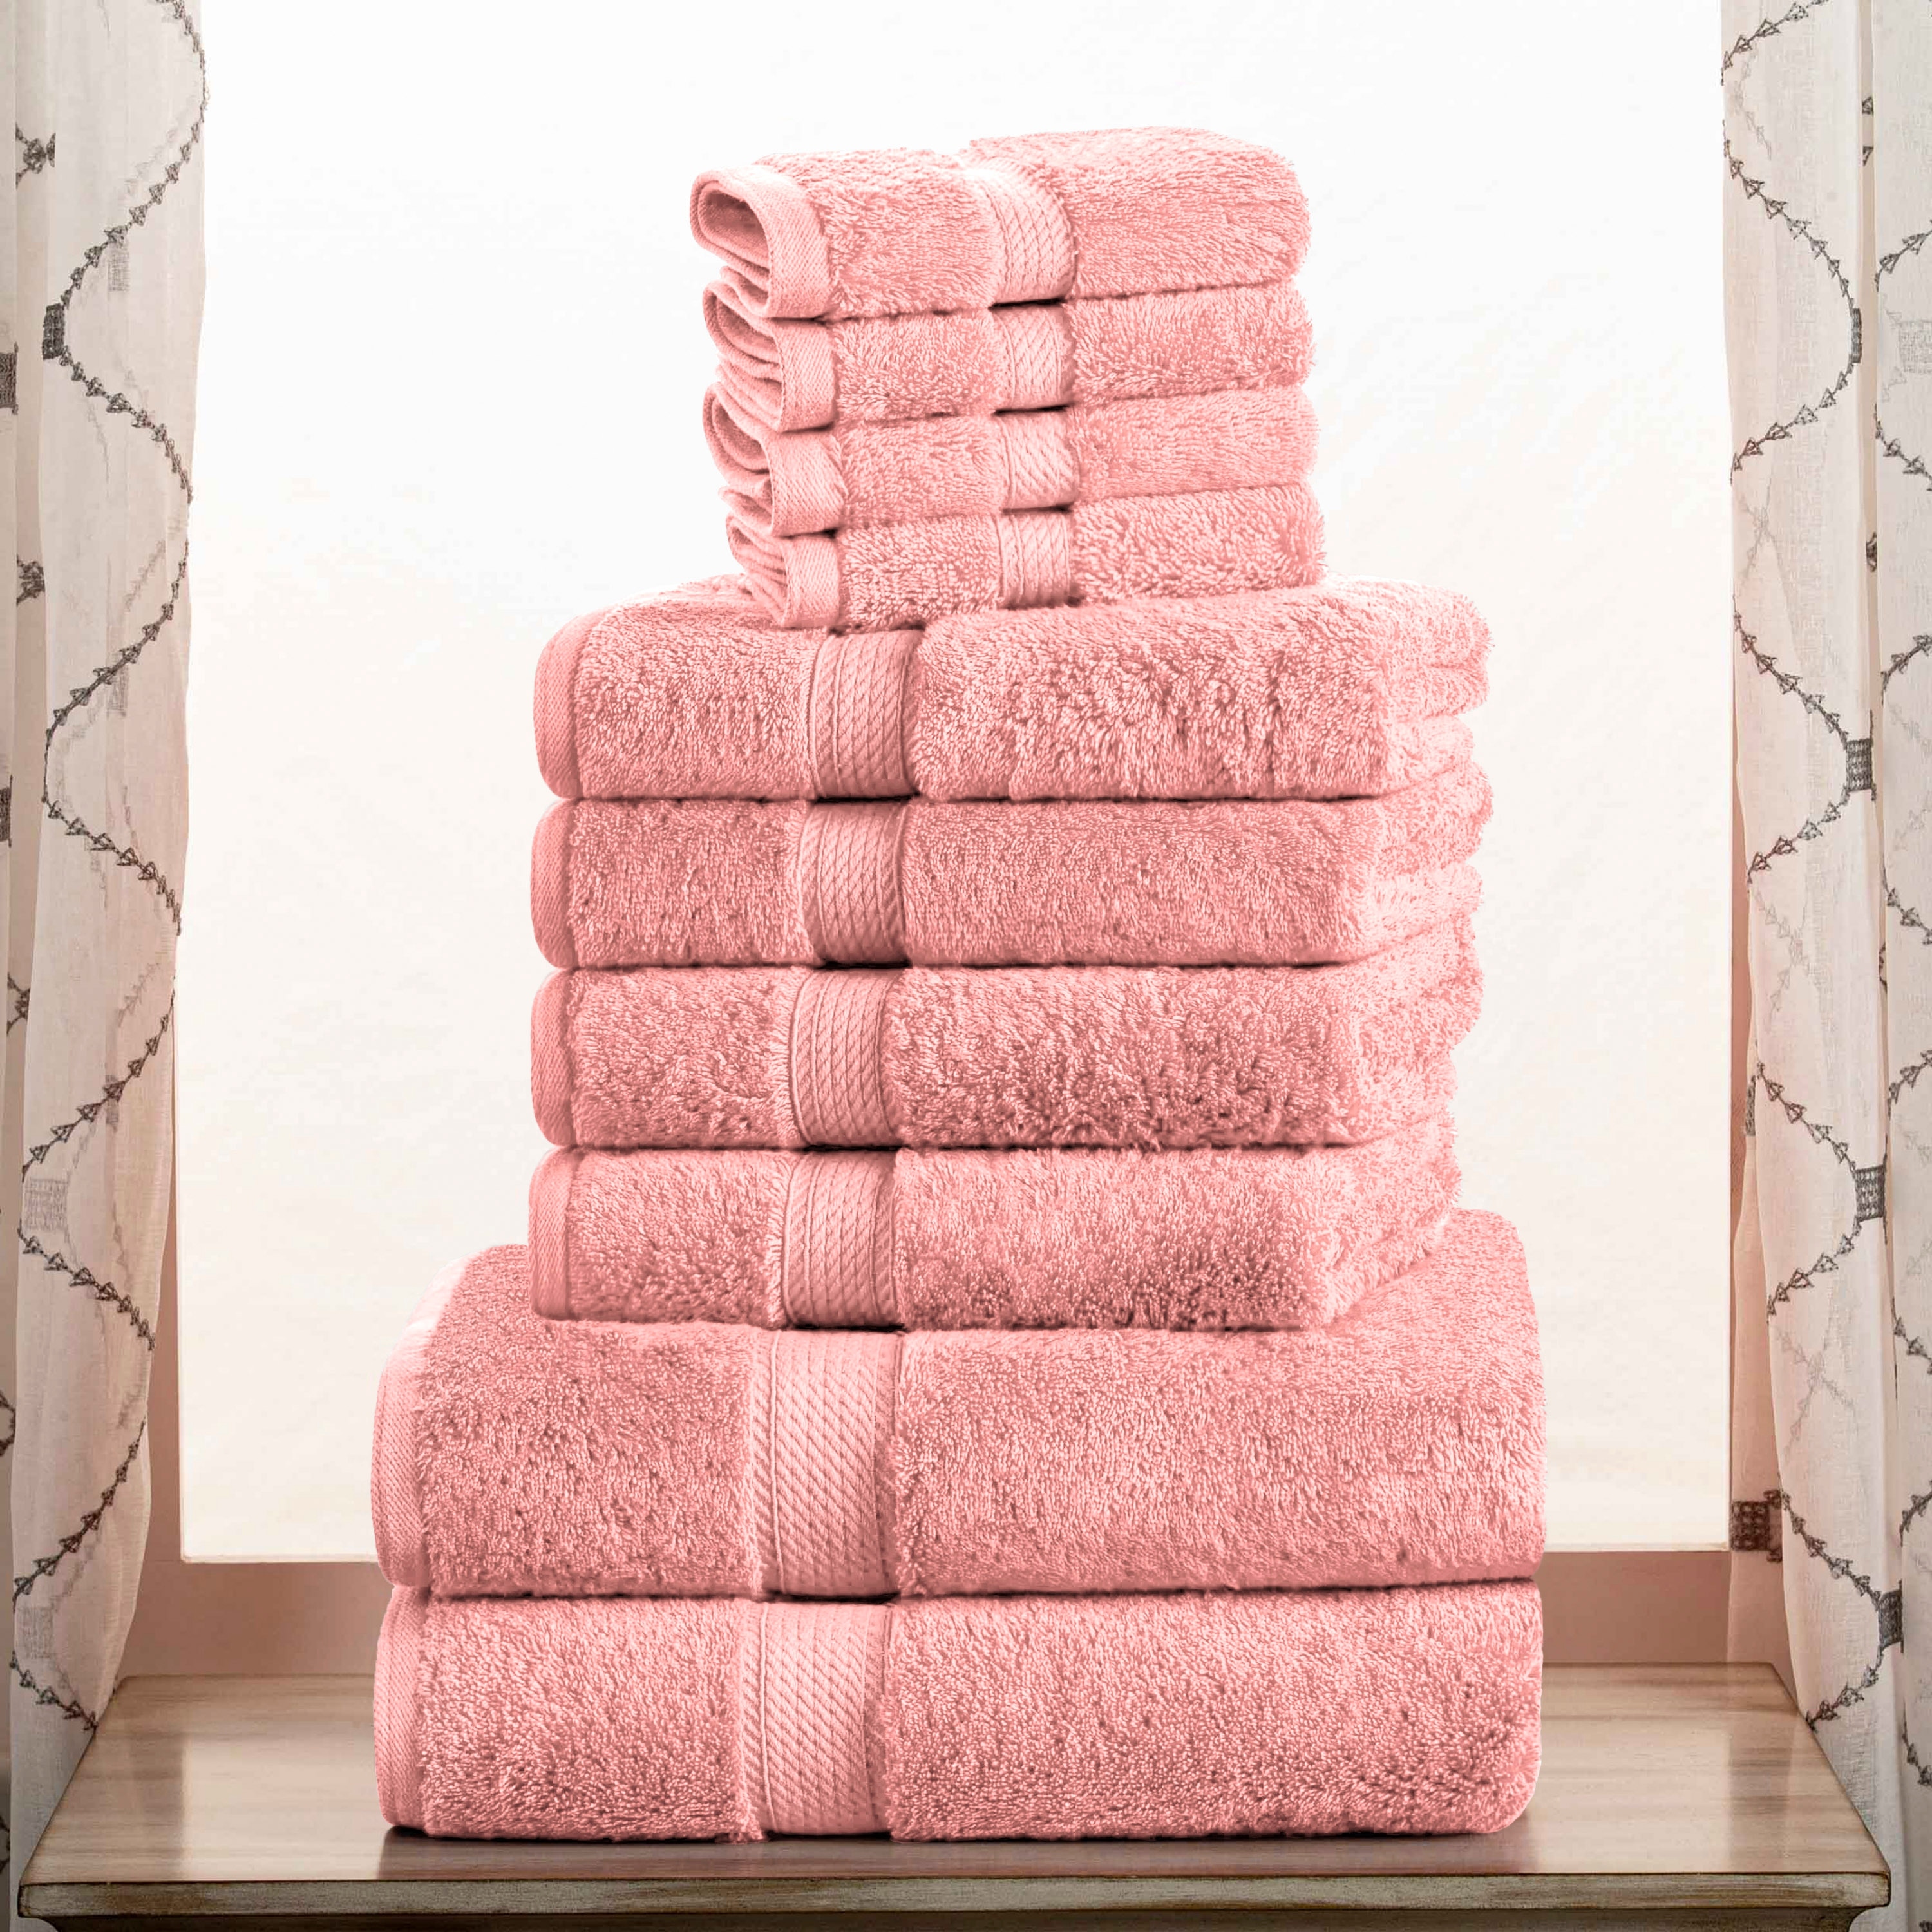 Superior 900 GSM Egyptian Cotton Bath Towel Set on sale at shophq.com -  446-533 in 2023